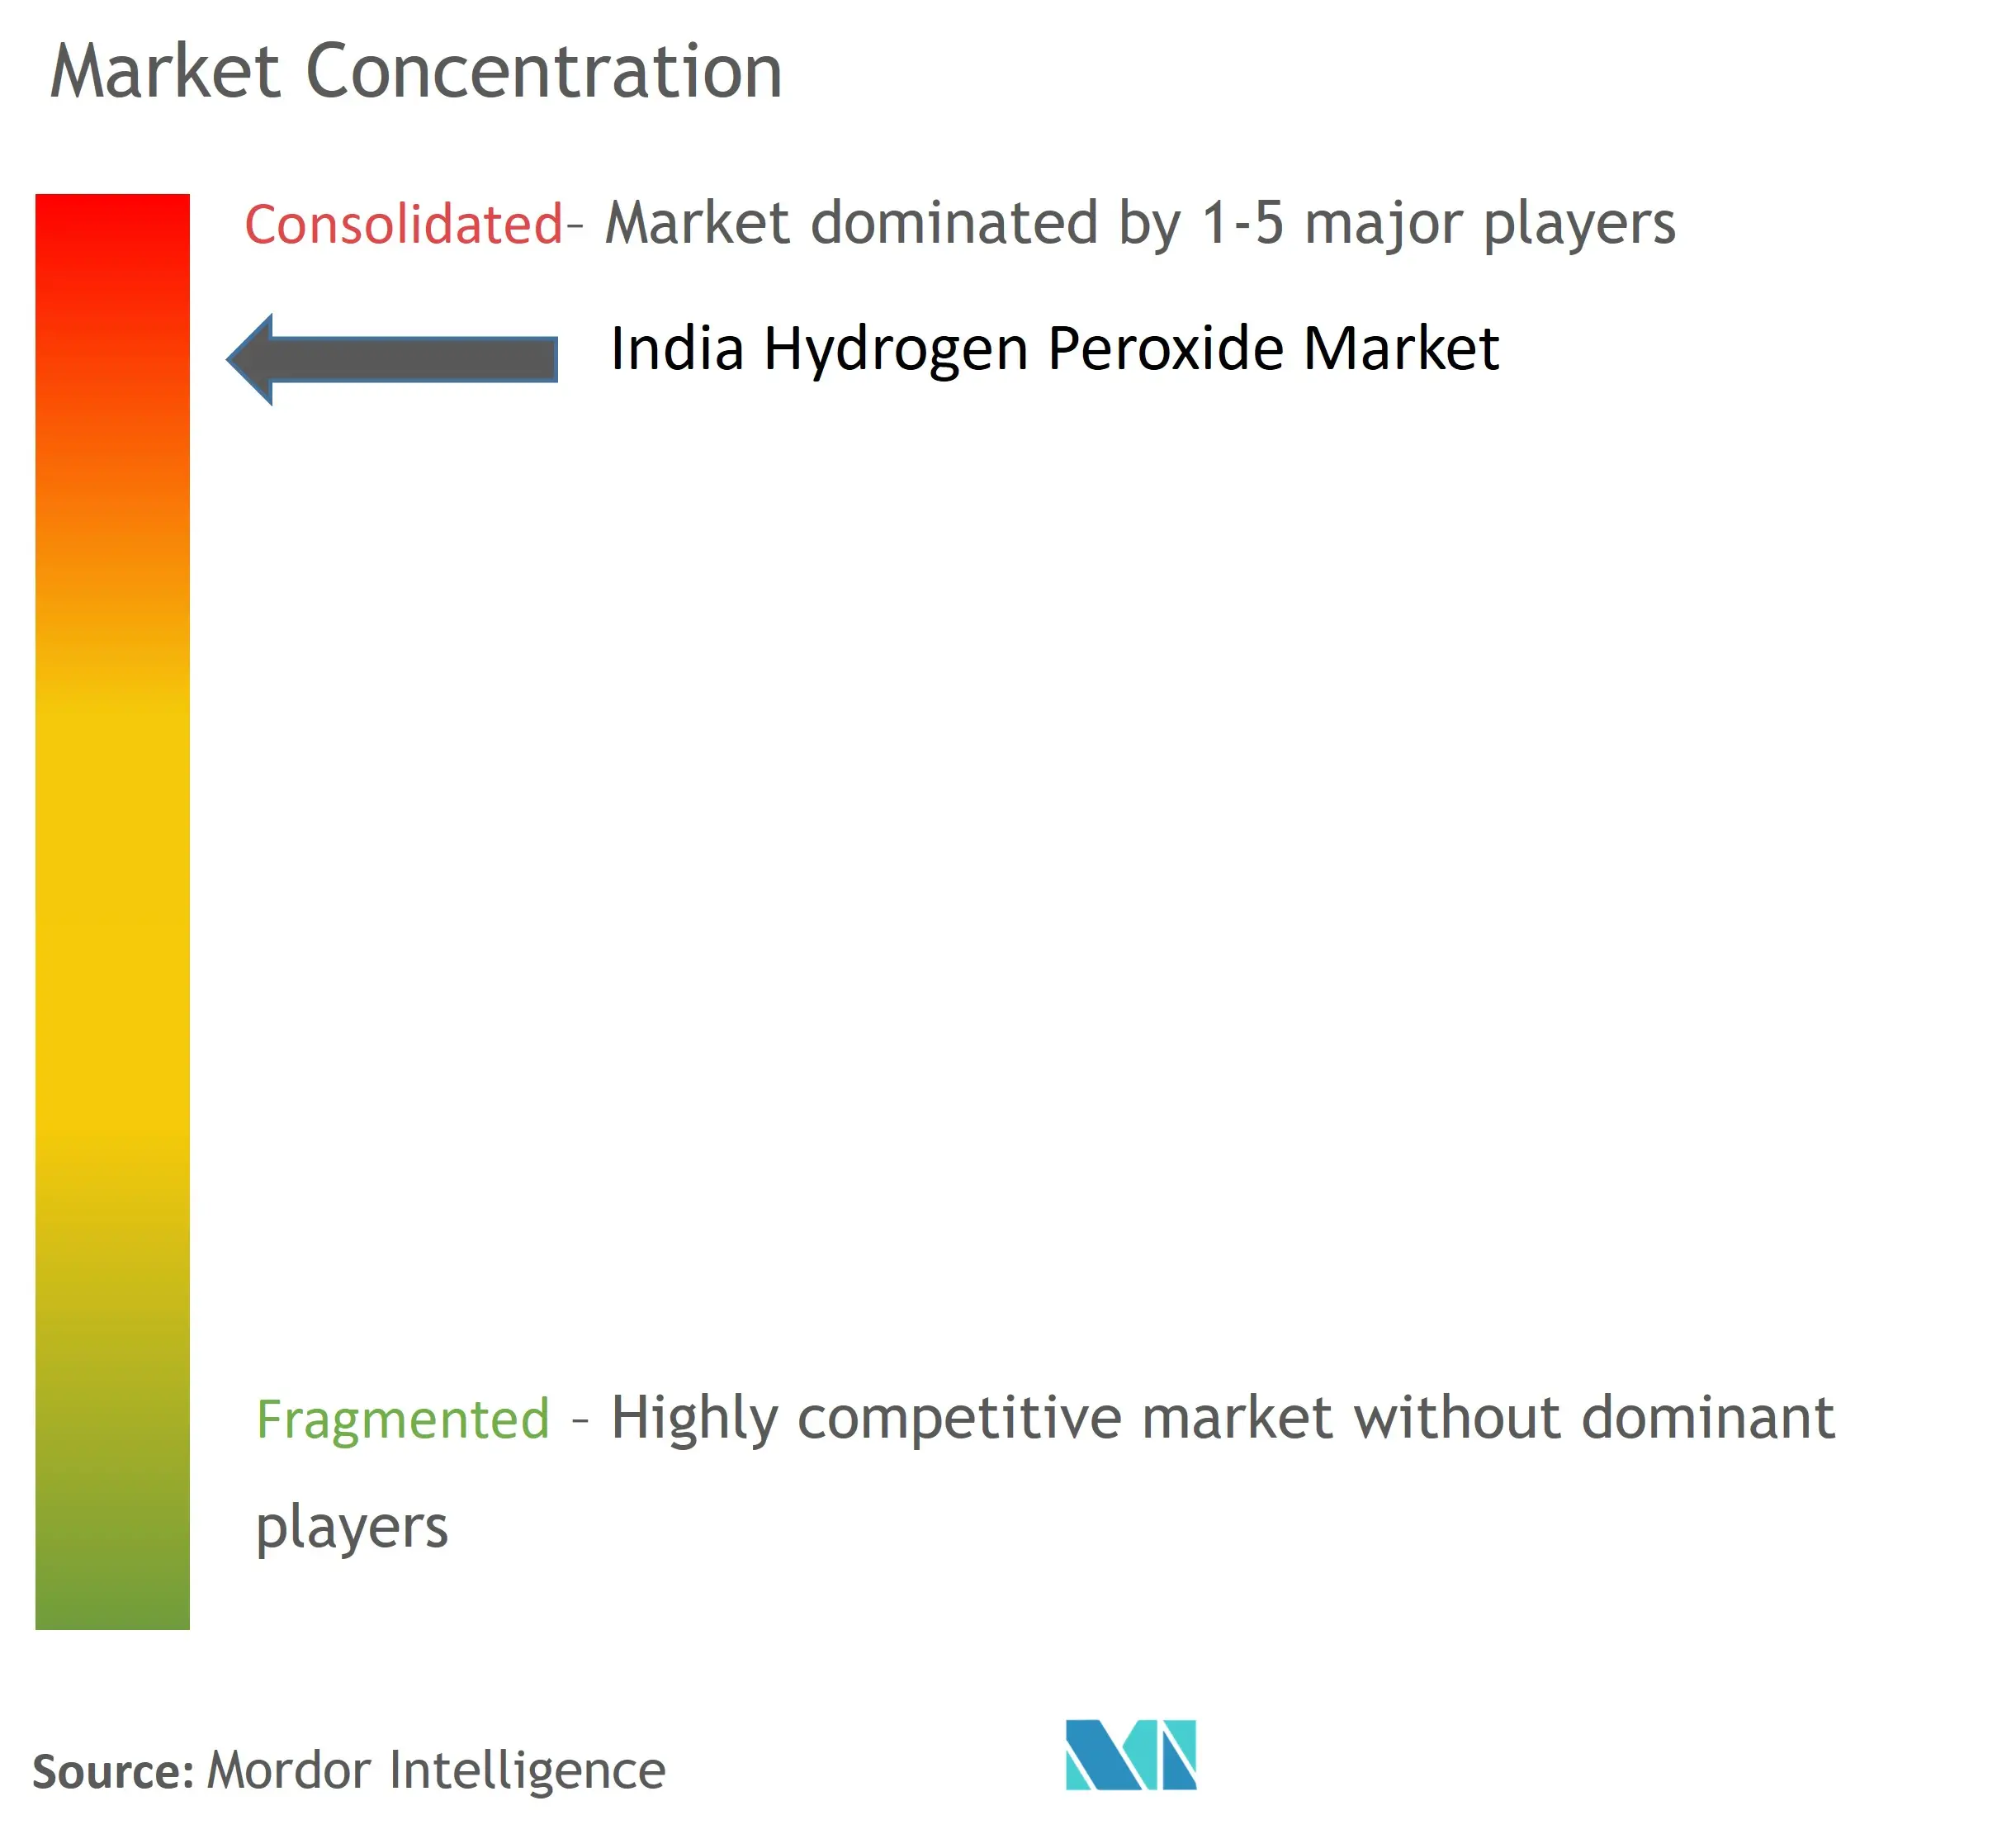 India Hydrogen Peroxide Market Concentration